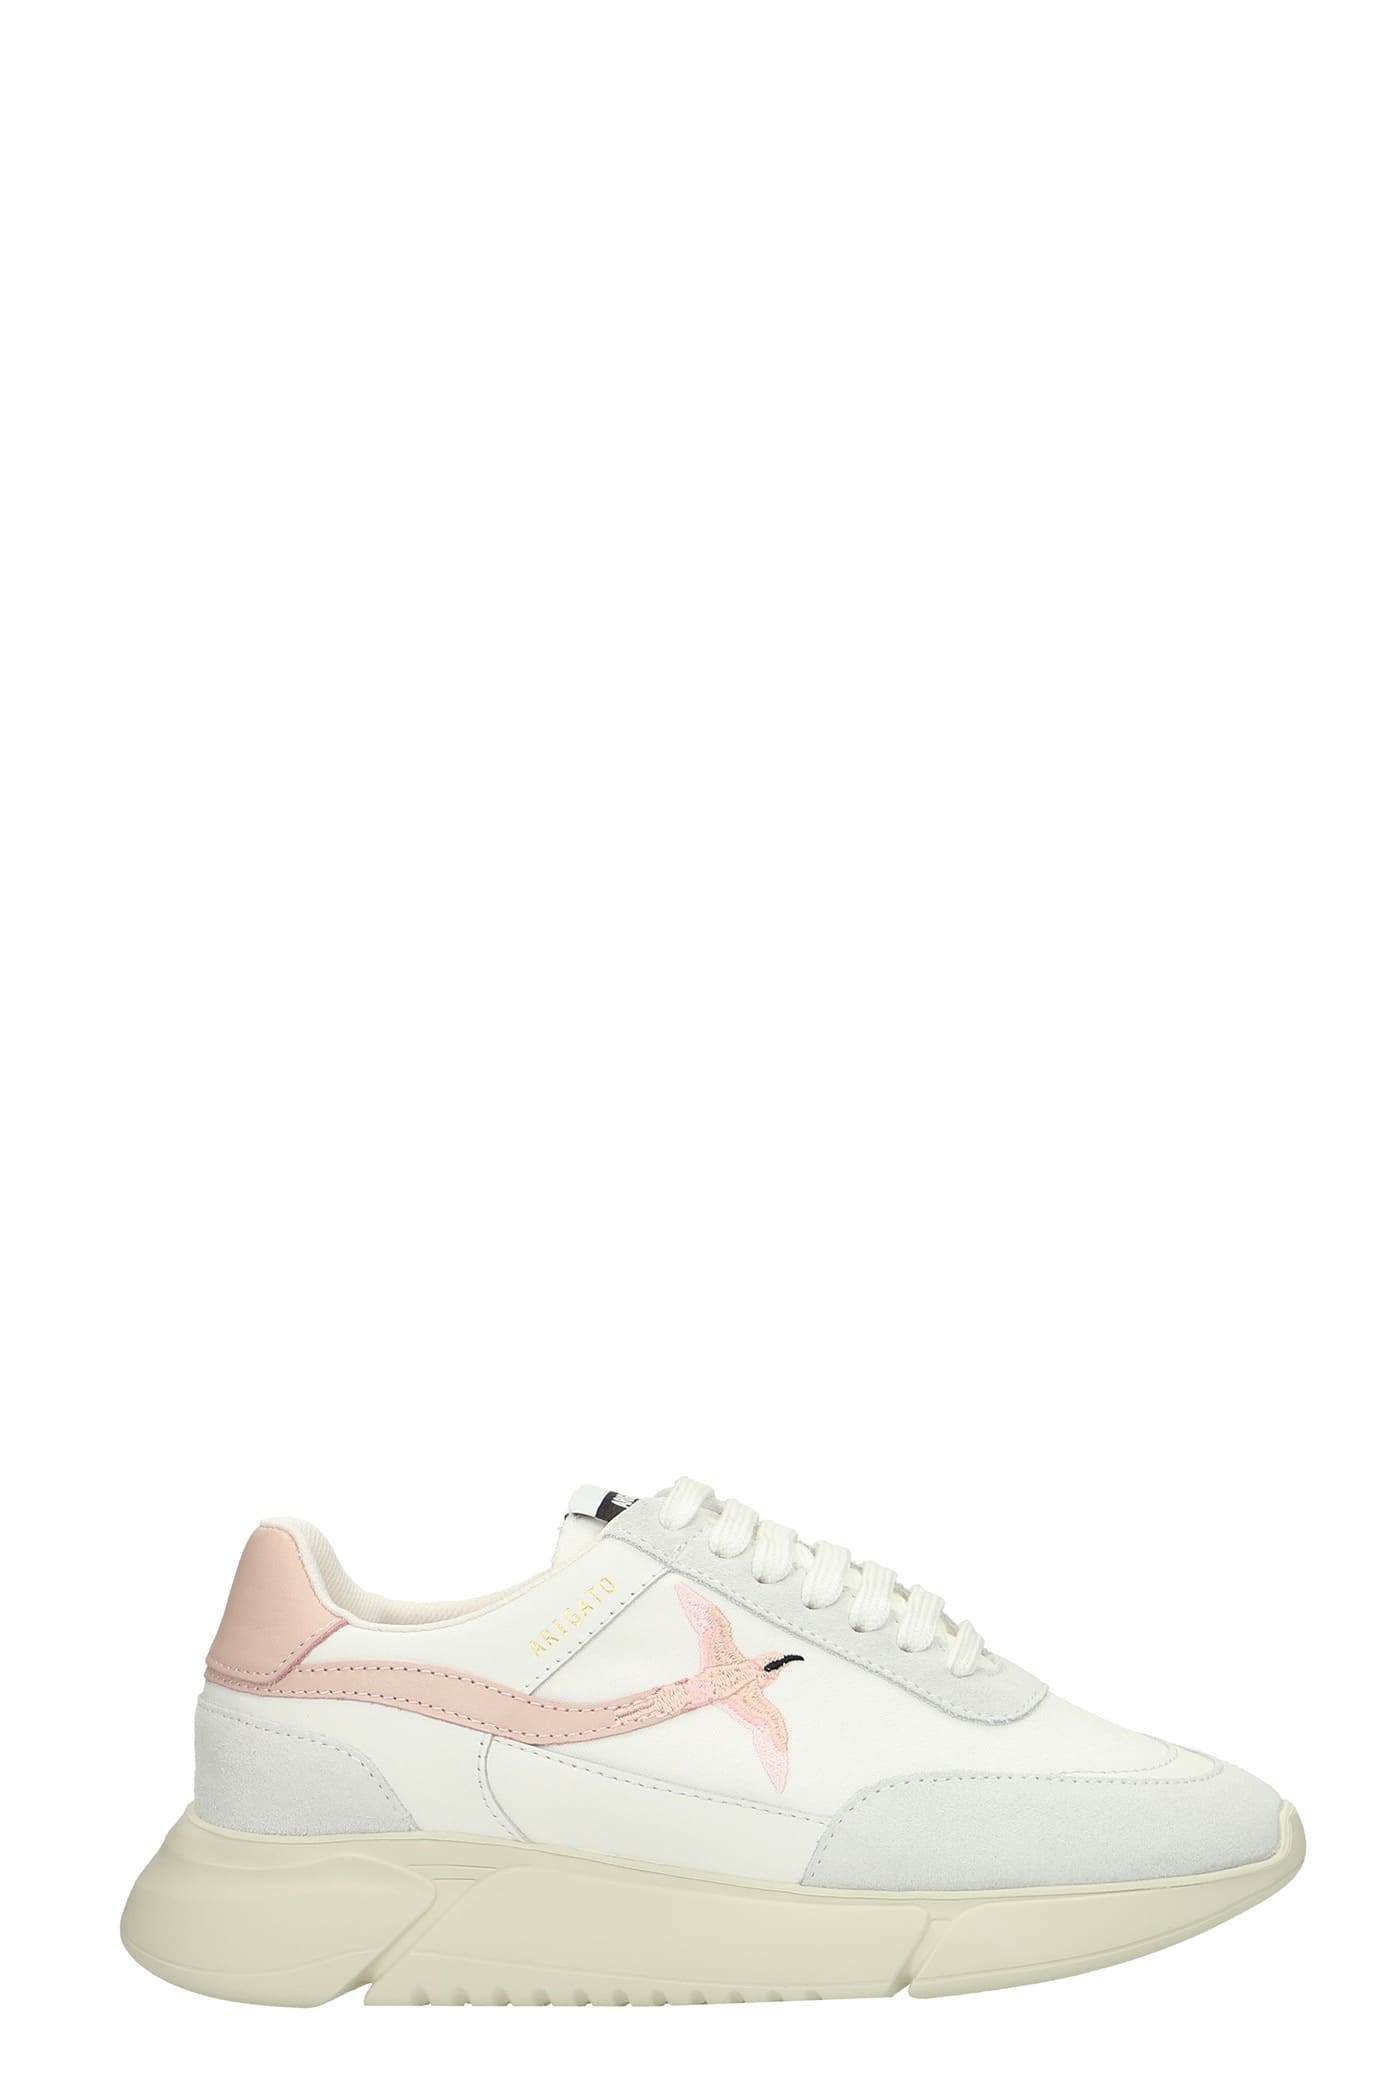 Axel Arigato Genesis Stripe Sneakers In White Suede And Leather